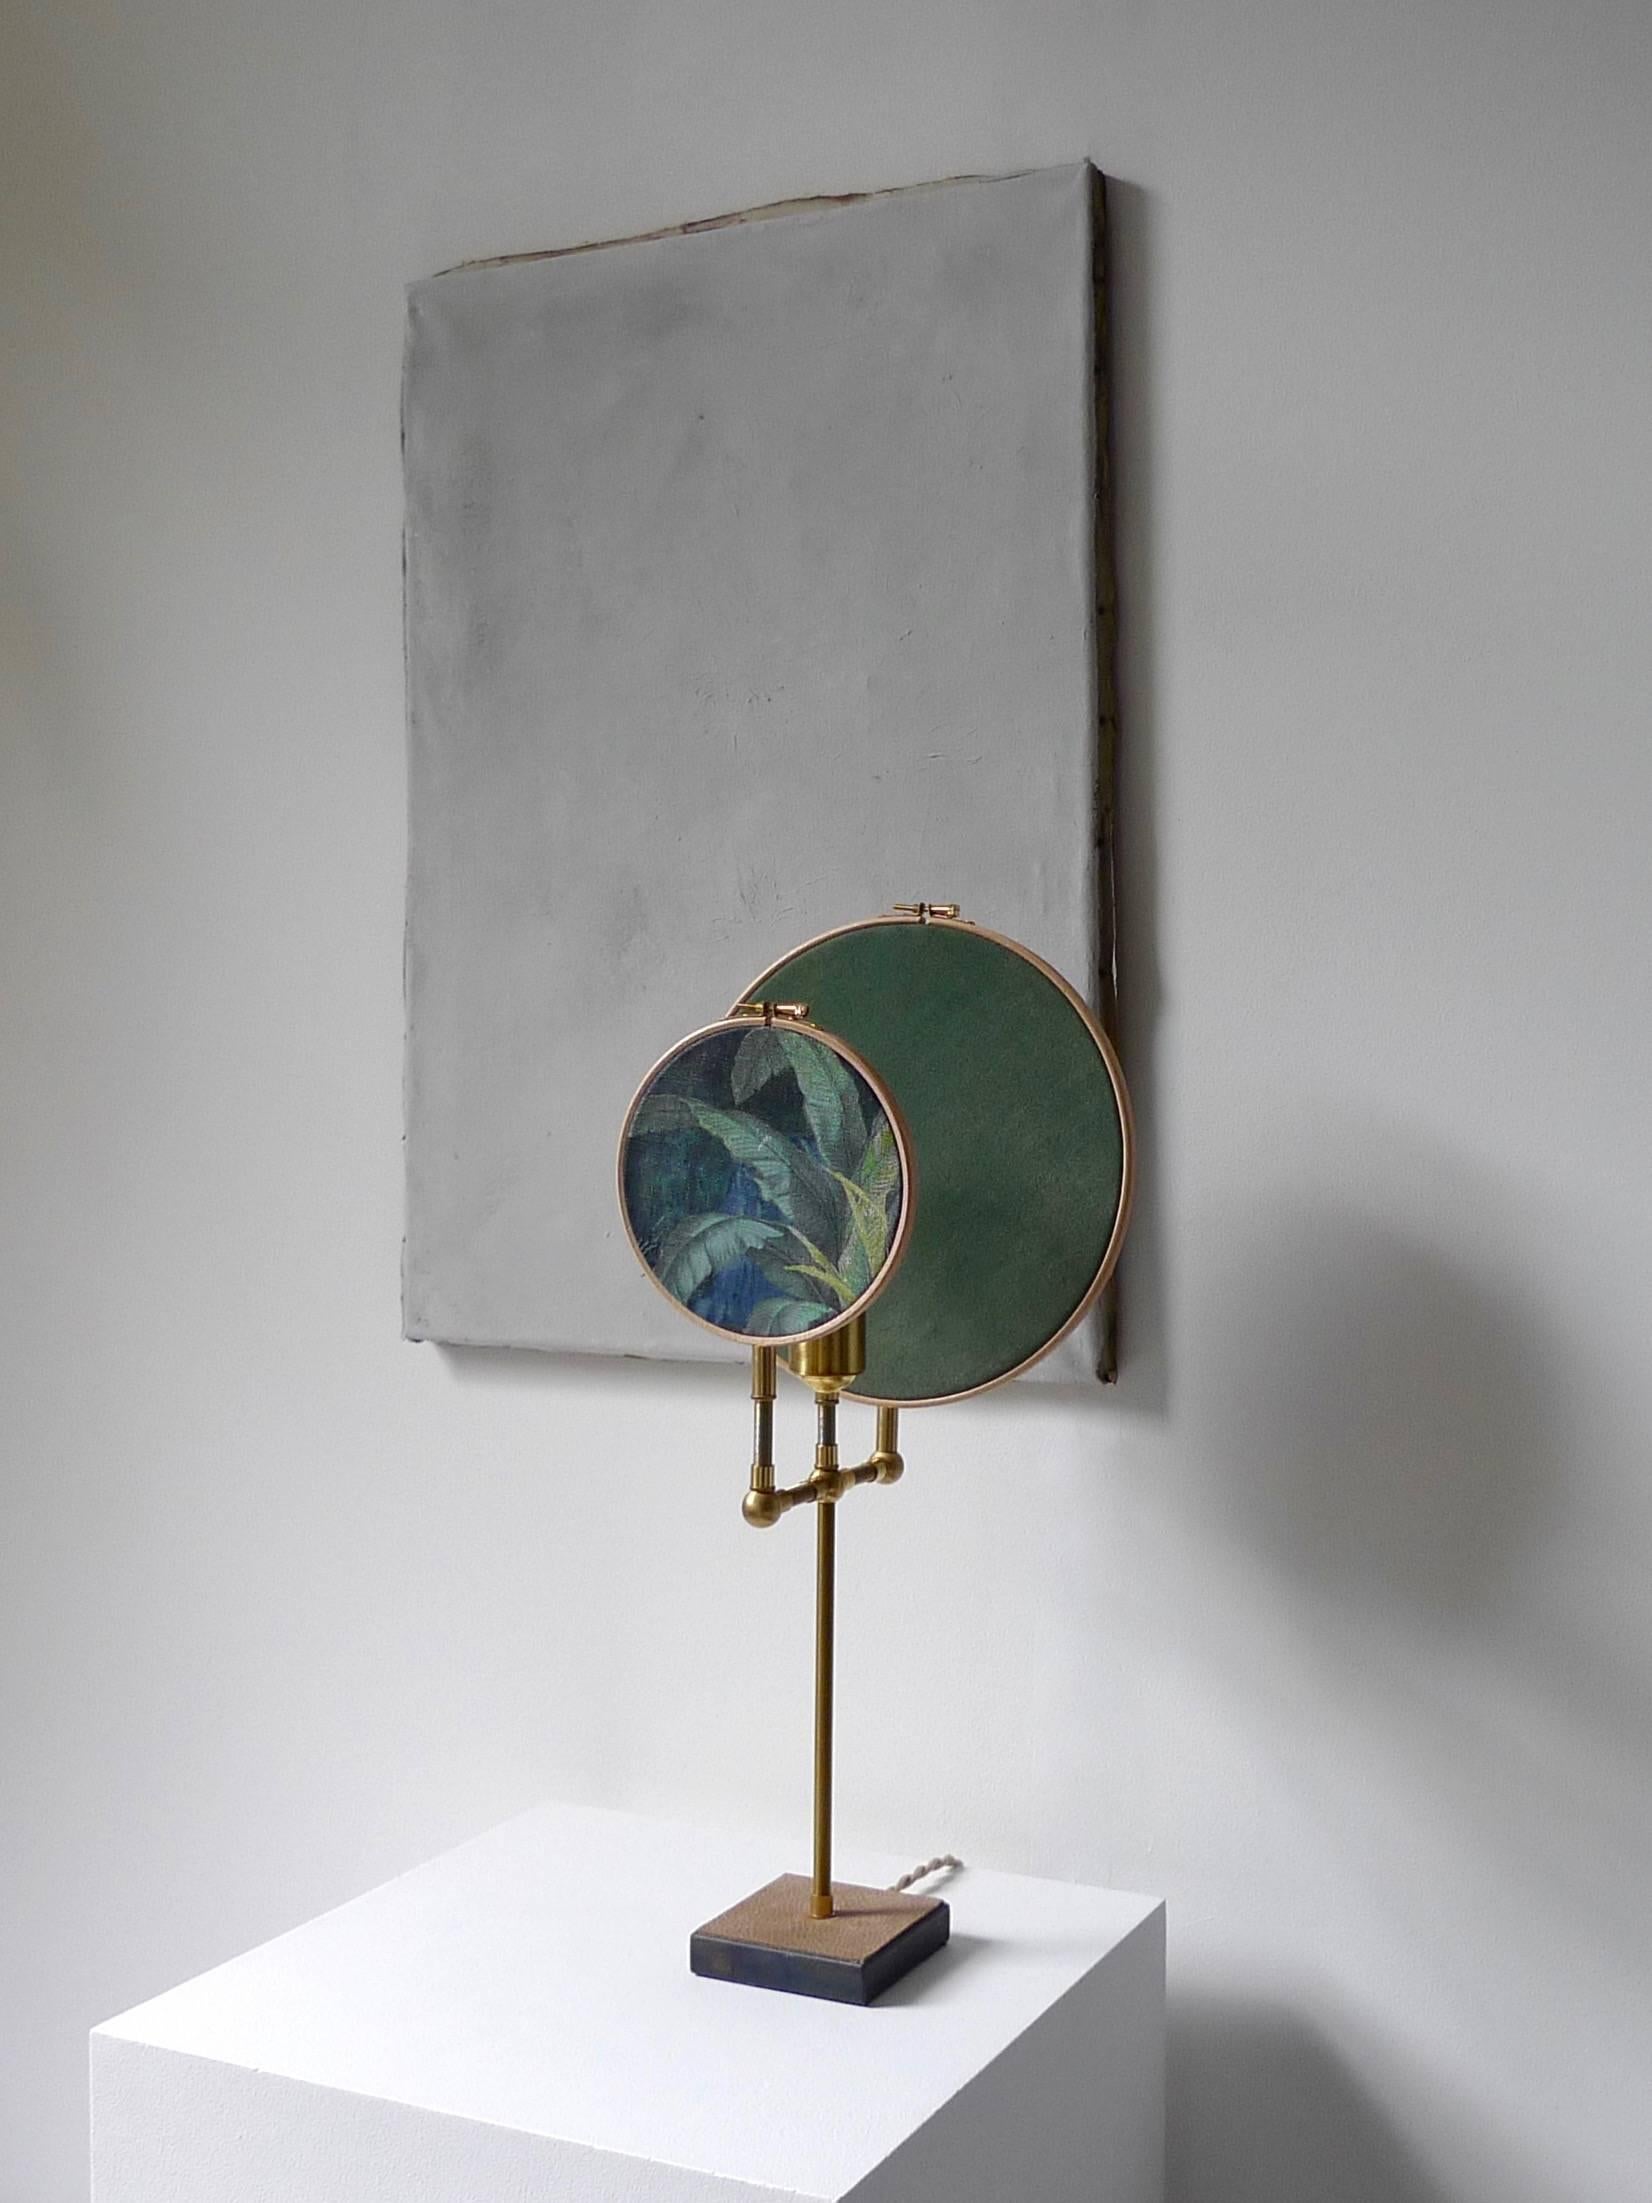 Light object, floor lamp, circle blue grey
Handmade in brass, leather, wood, hand printed and painted linen.
A dimmer is inlaid with leather
Dimensions: H 55 x W 27 x D 16 cm.
The design artwork is meticulously handcrafted in a limited series,